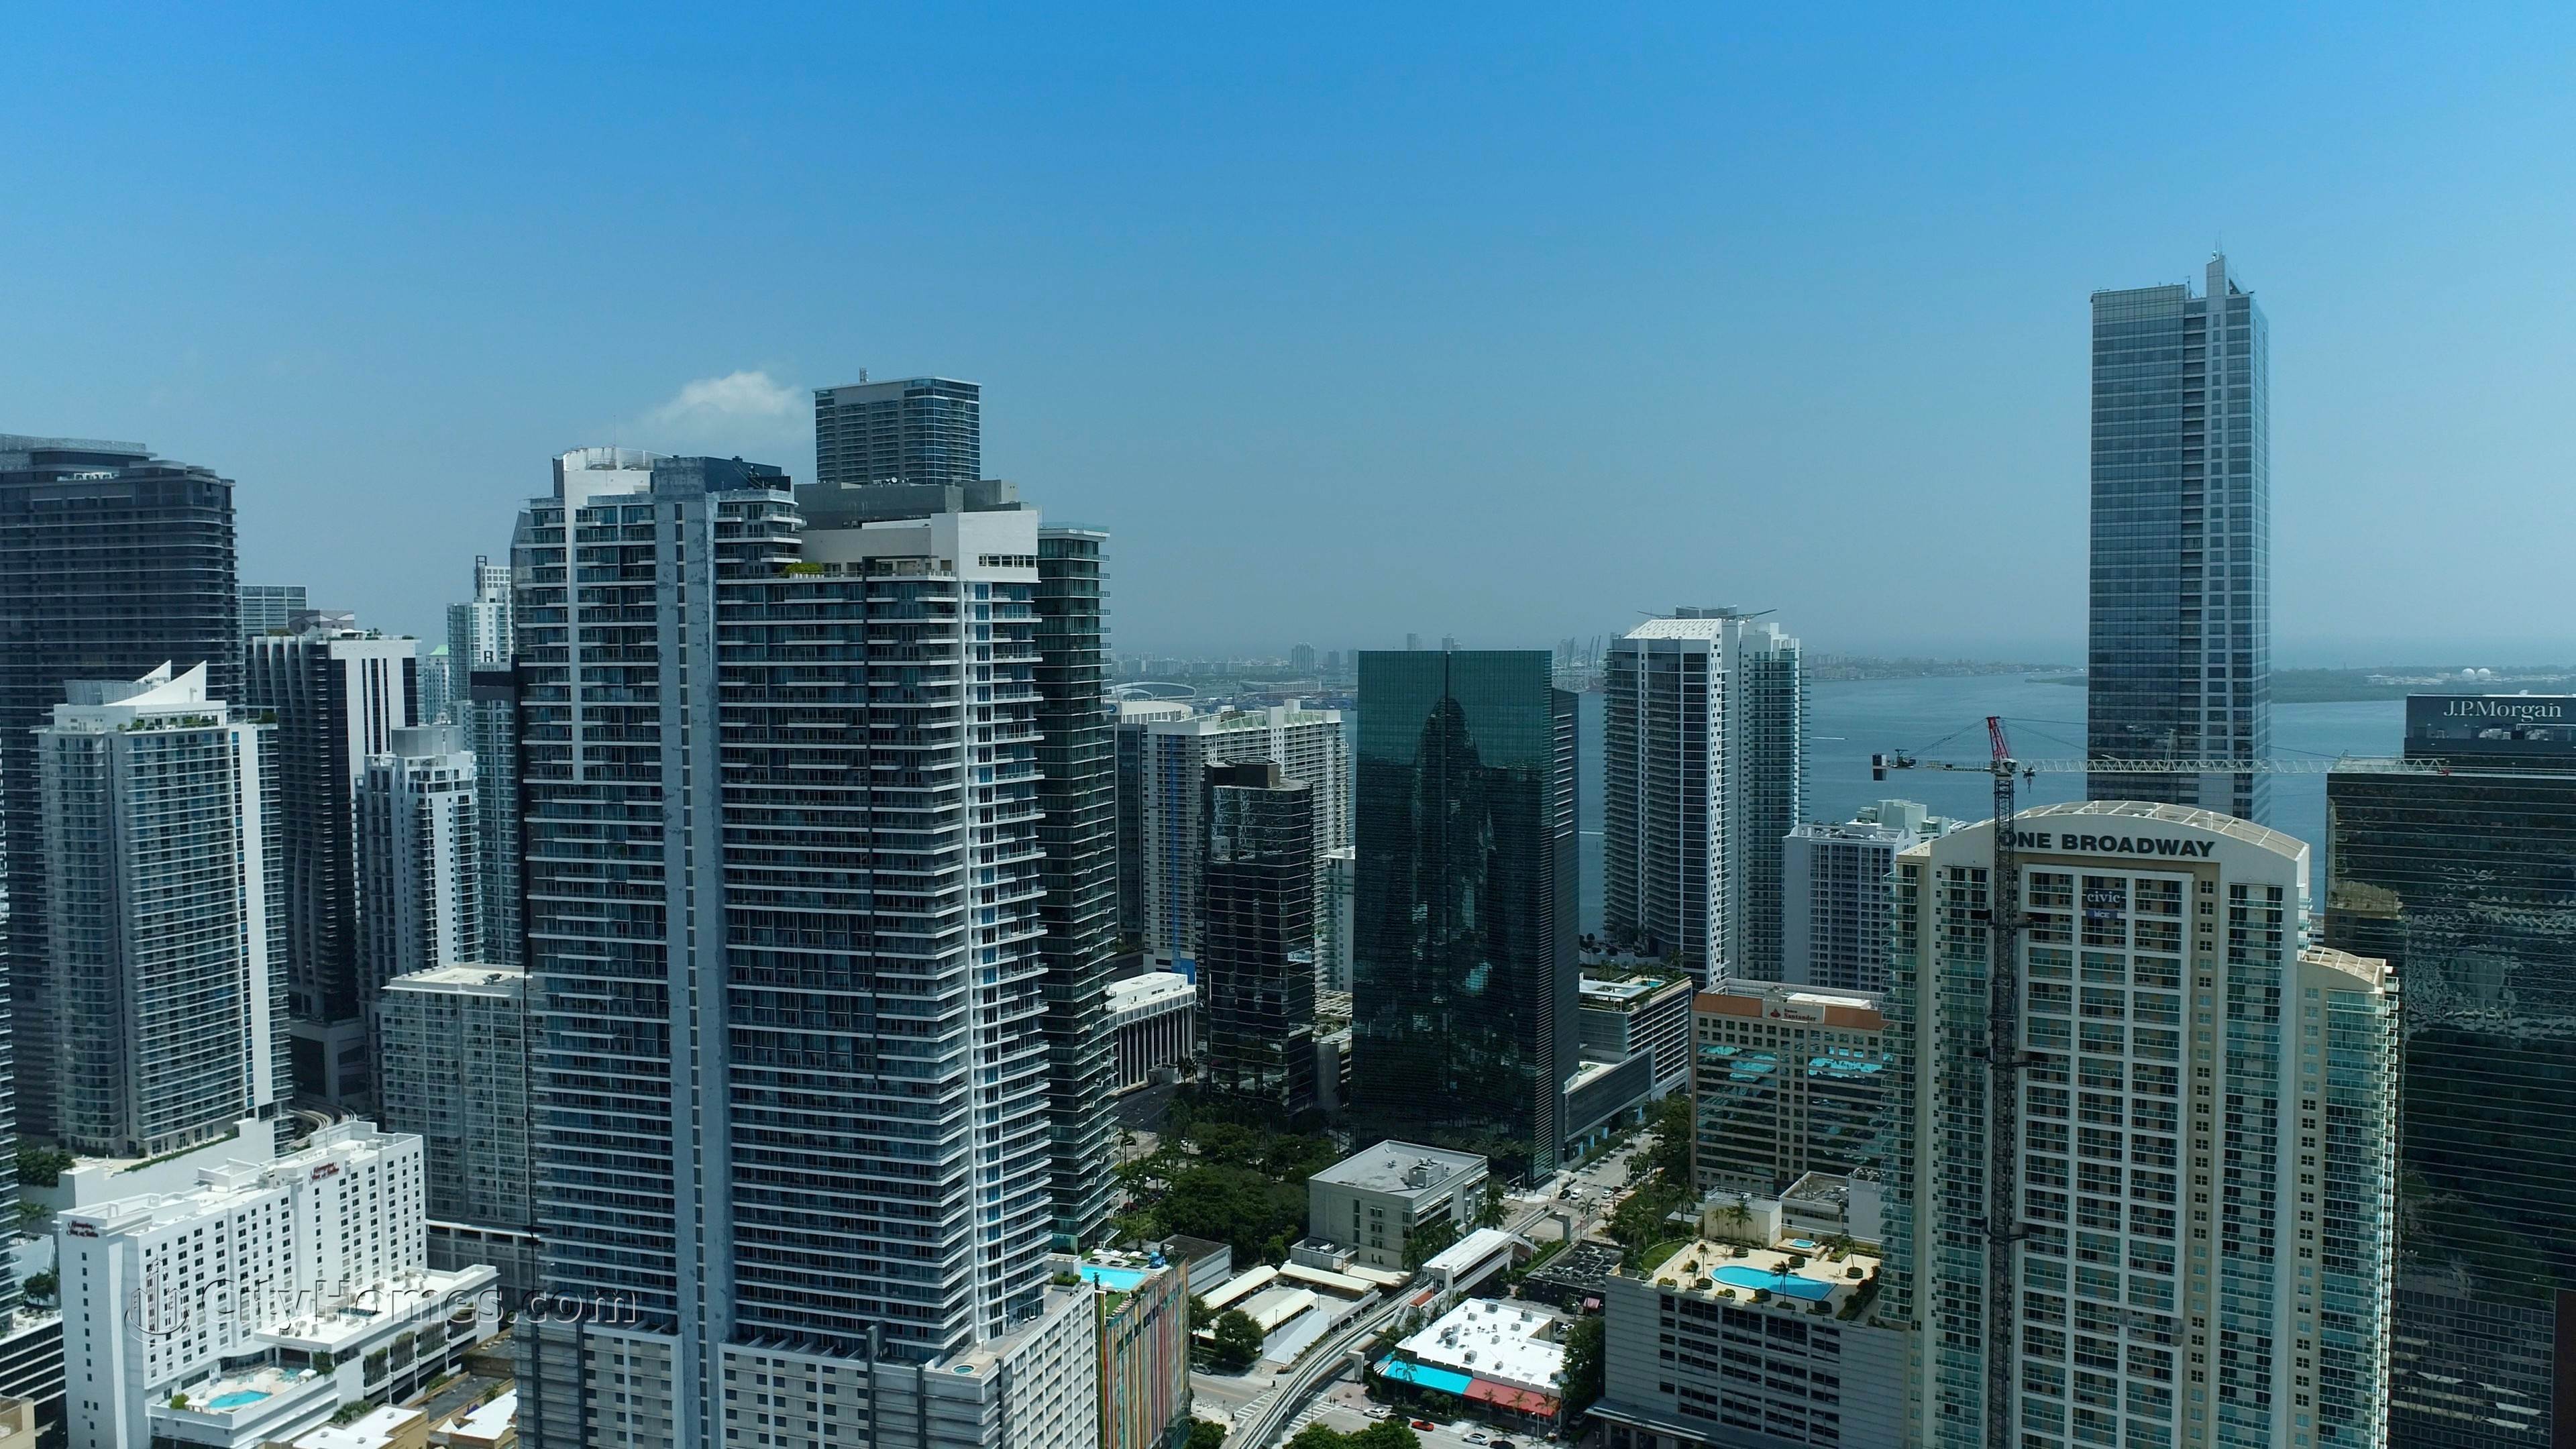 6. Infinity building at 60 SW 13th St, Brickell, Miami, FL 33130